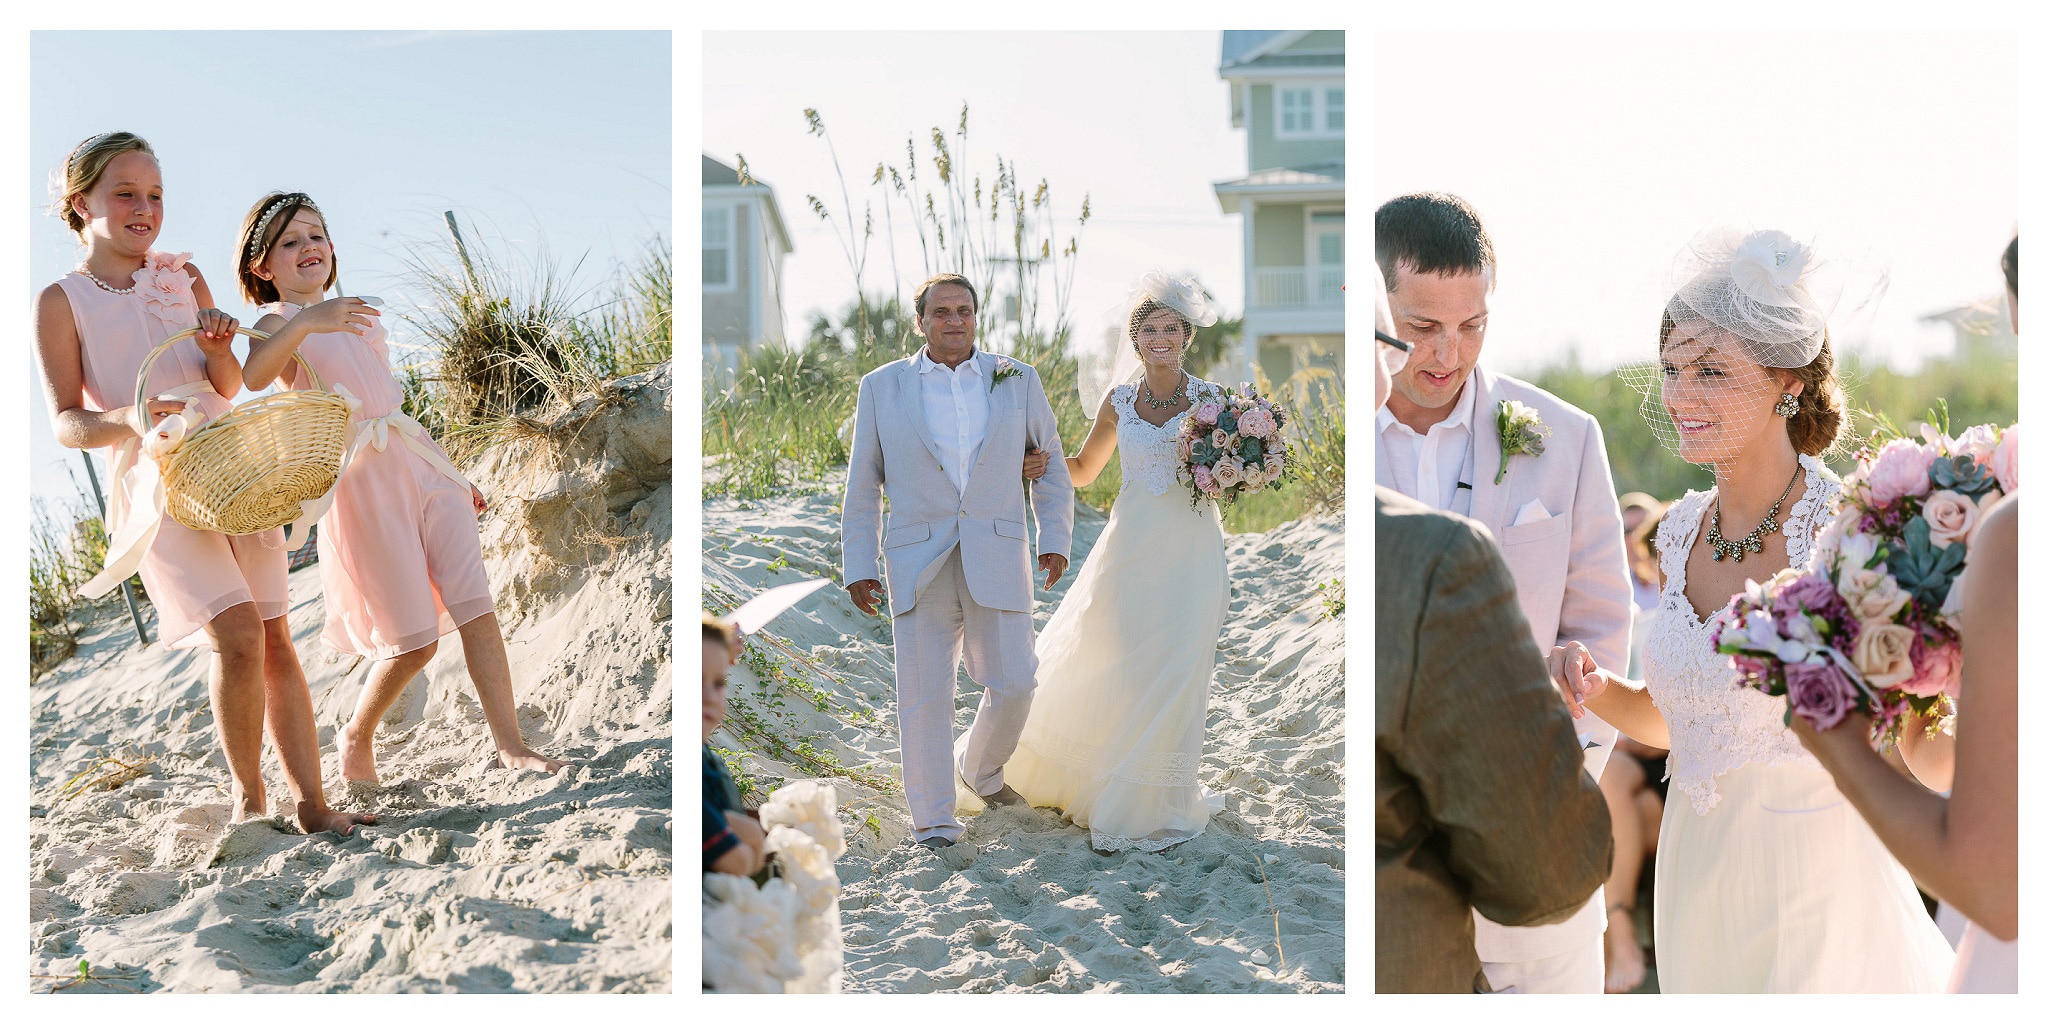 Flower girls walking in the sand, a father giving away his daughter and the couple at the altar - Venue - Beach House Gulf Stream Breeze, Beach Realty Catering and Cake - Buttercream Cakes and Catering, LLC Flowers - Callas Florist Event Rentals - Event Works DJ - Scott Shaw